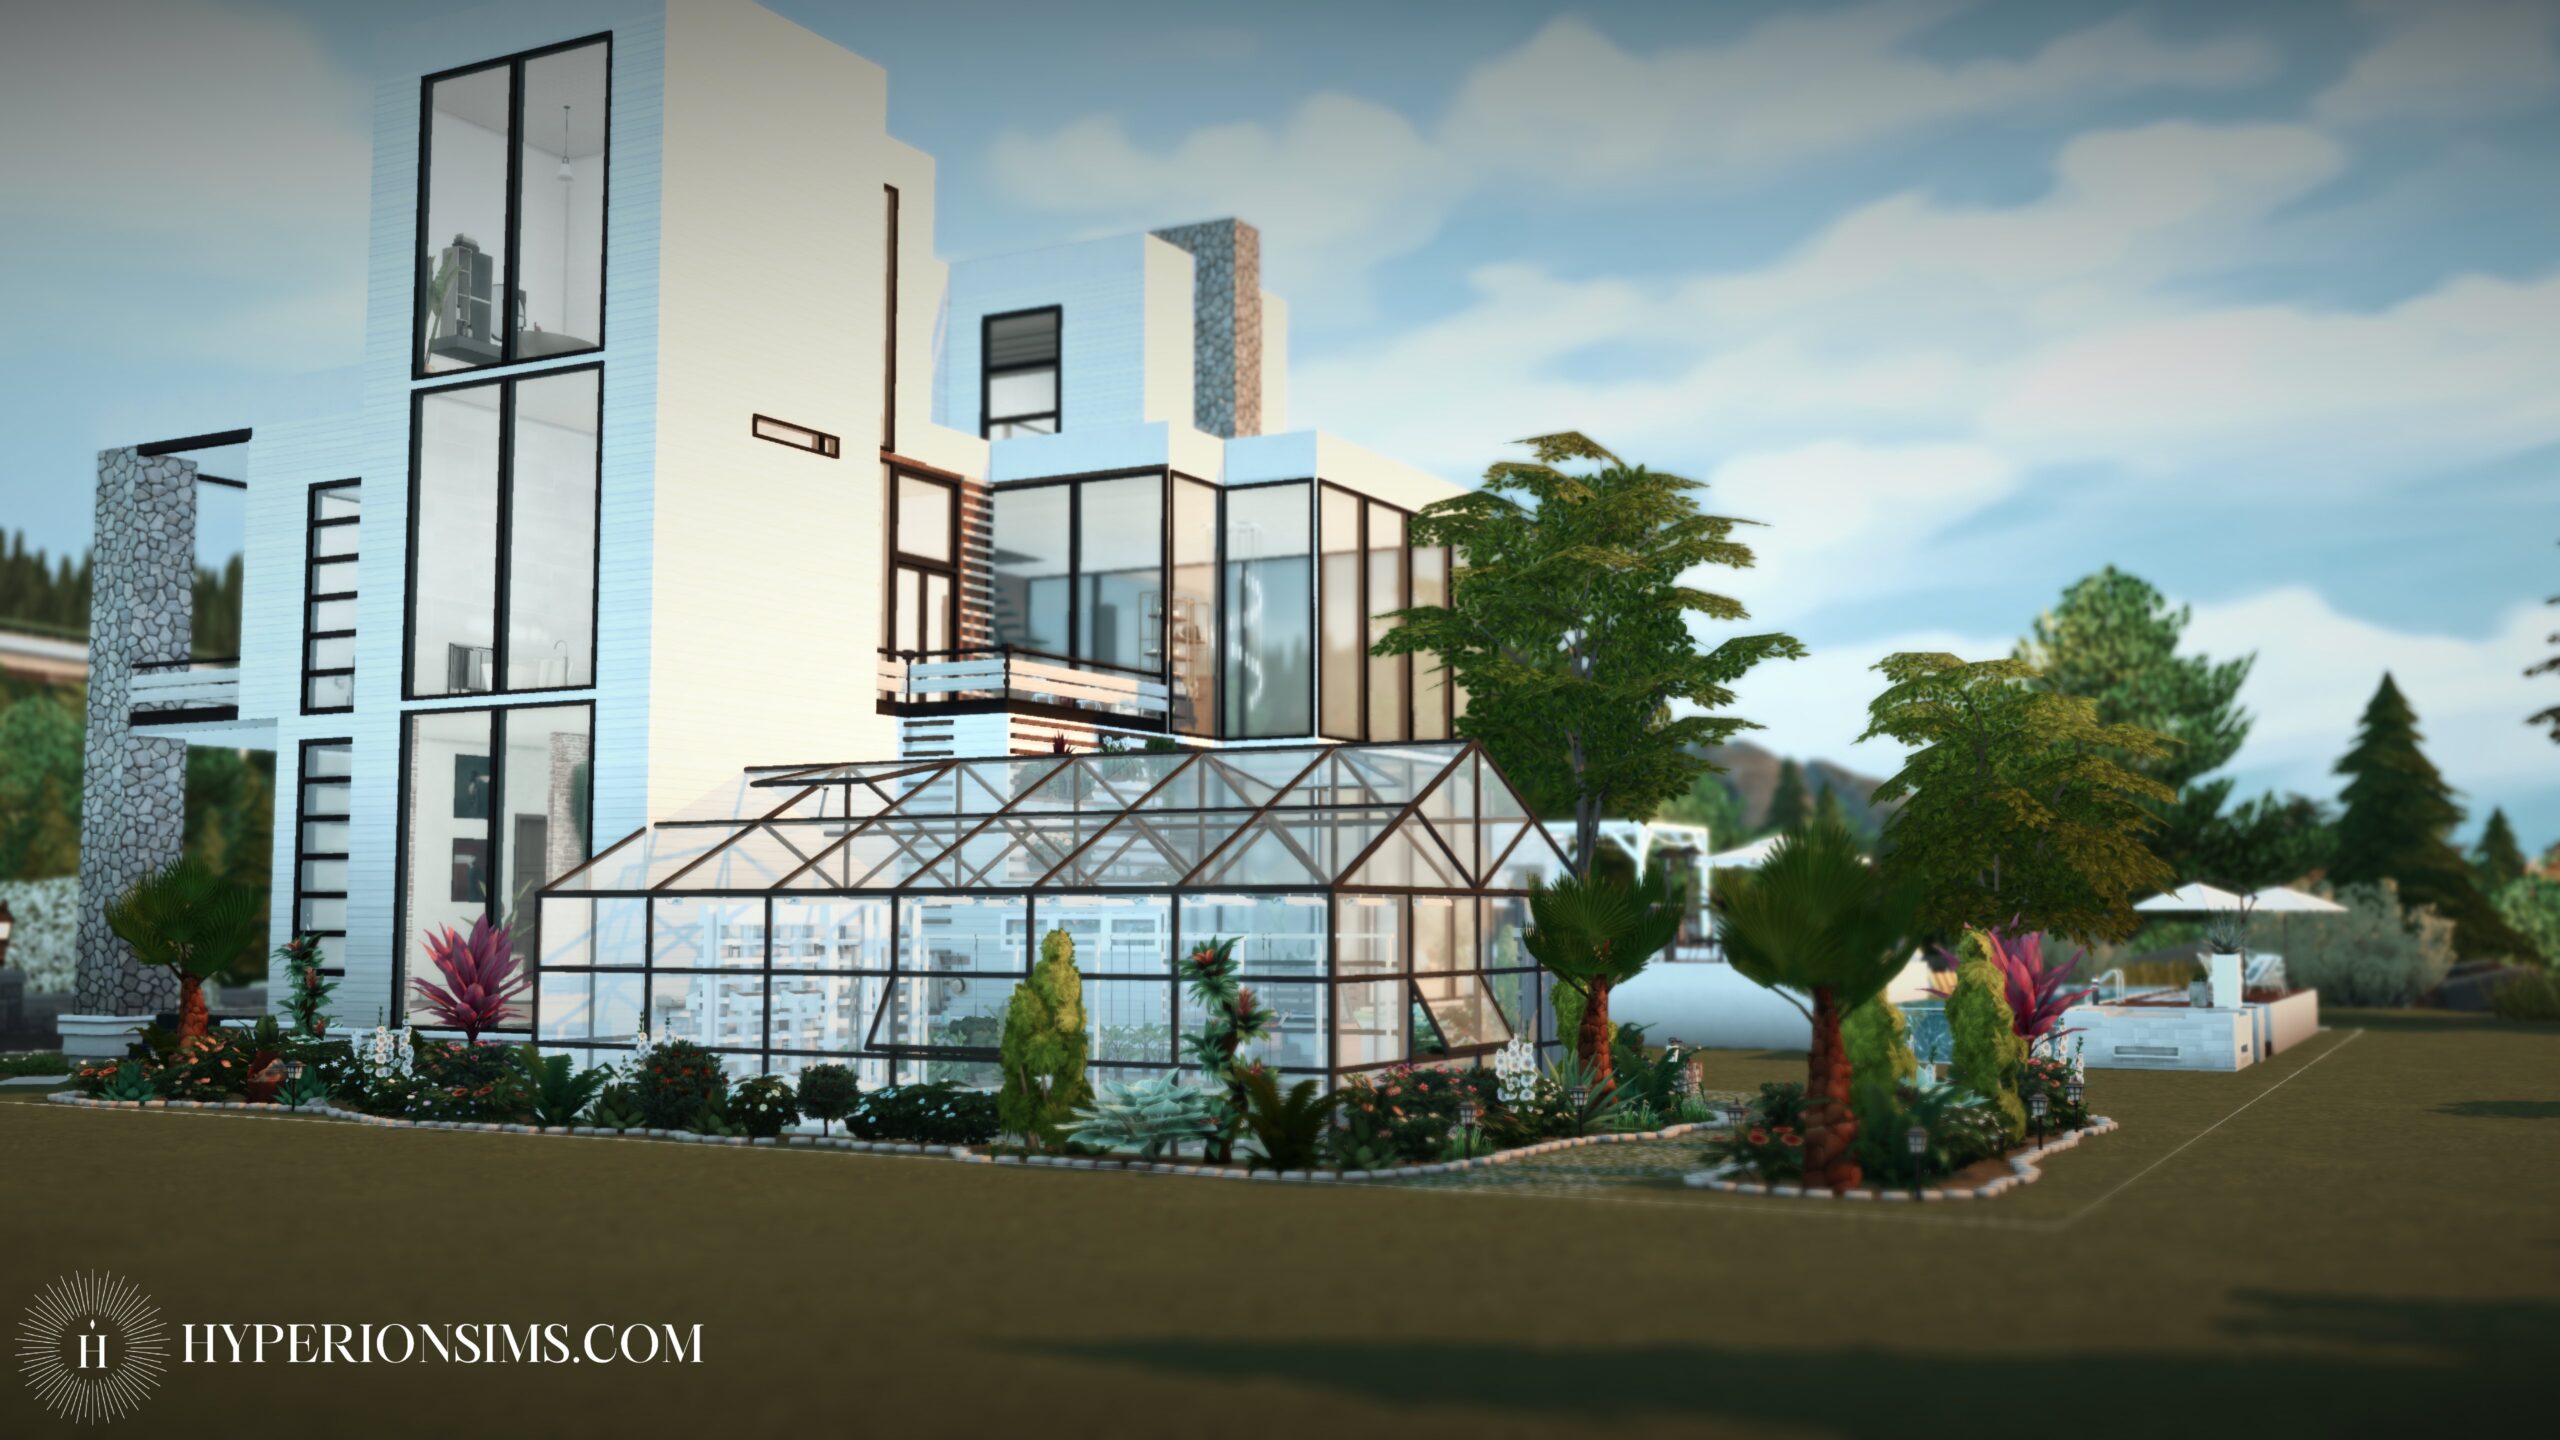 944CavalierCove GreenhouseExterior3 Scaled, Hyperion Sims Design